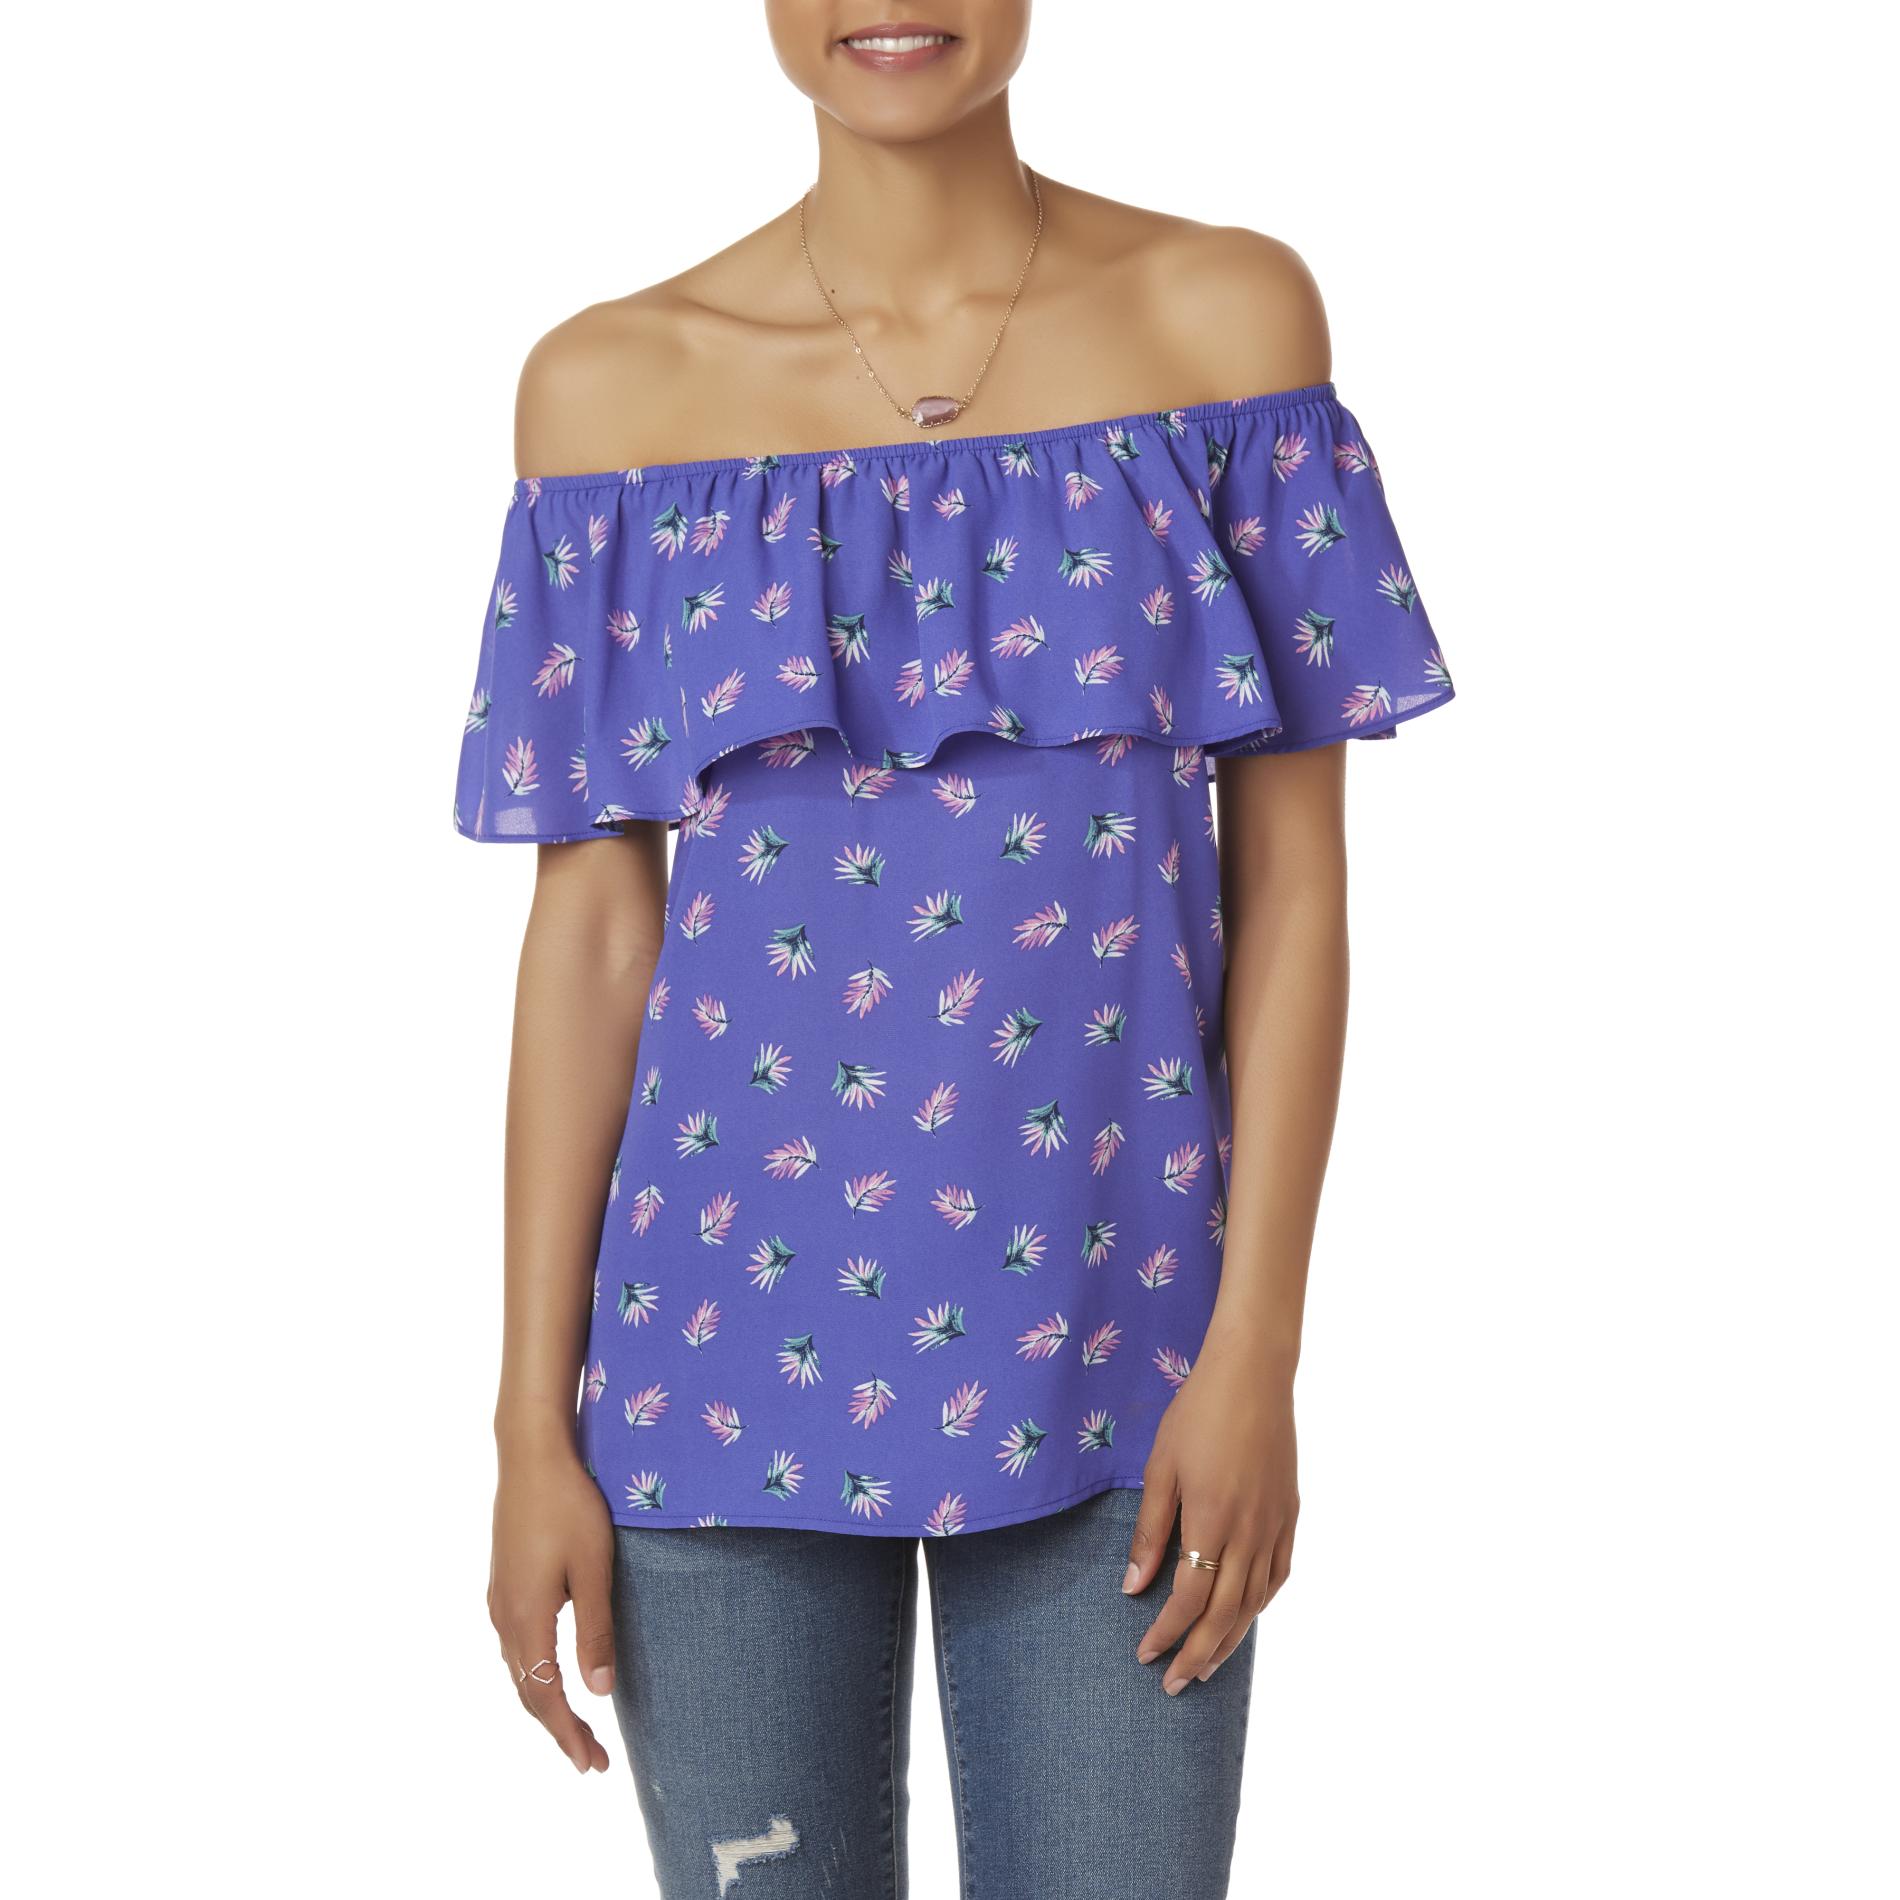 Simply Styled Women's Off-The-Shoulder Top - Floral